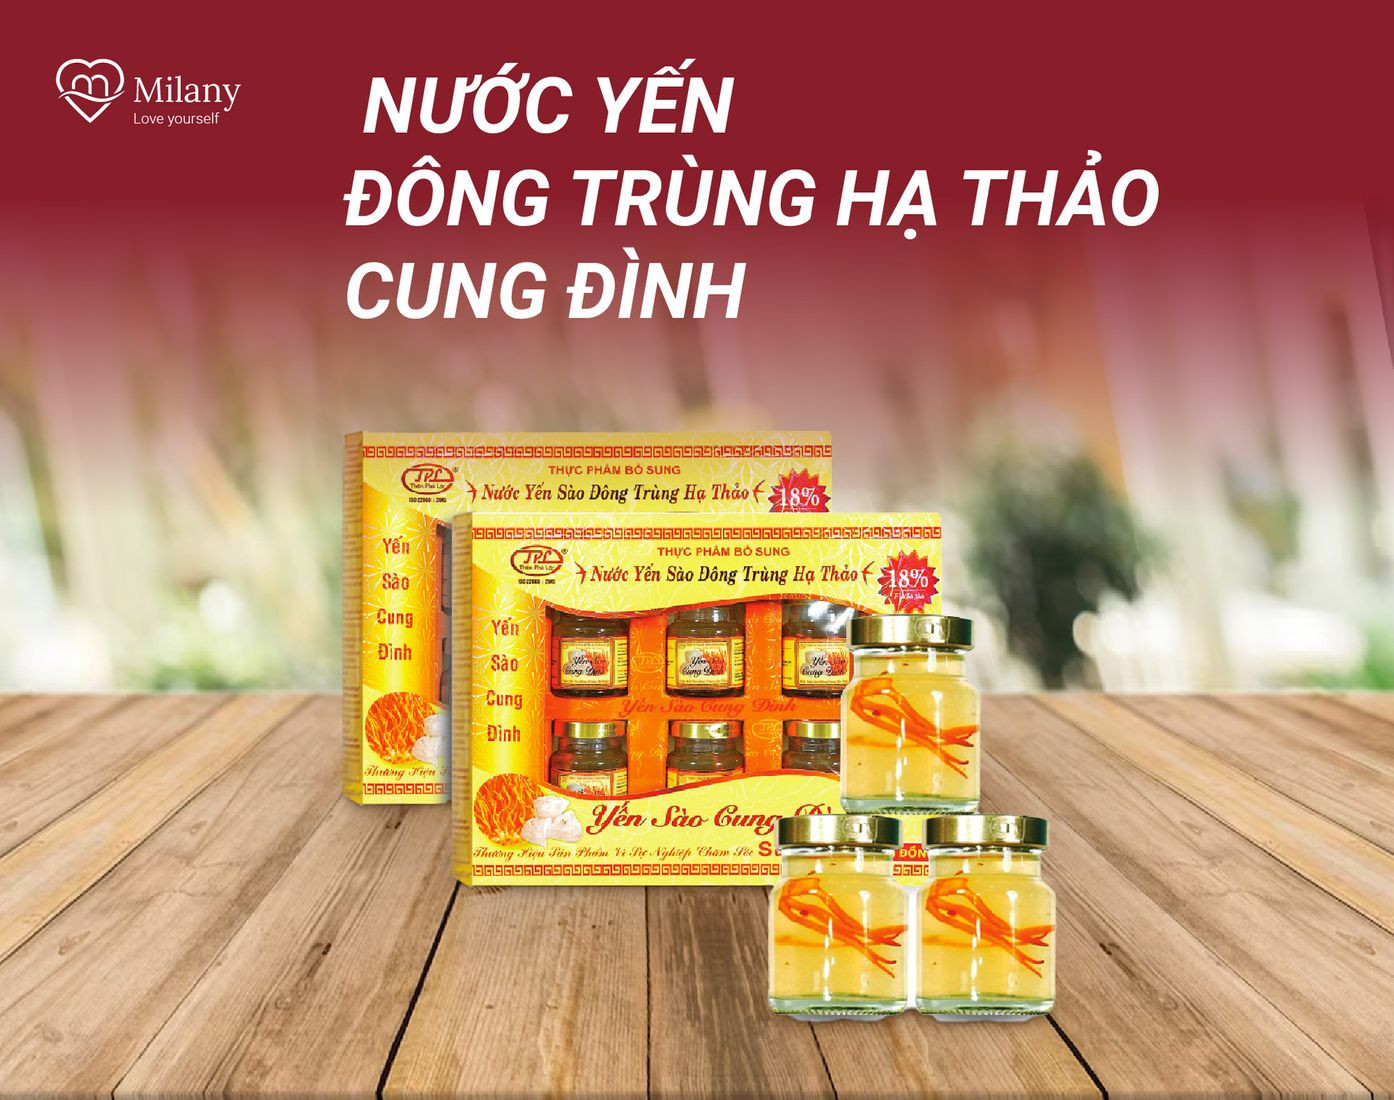 nuoc yen trung thao cung dinh